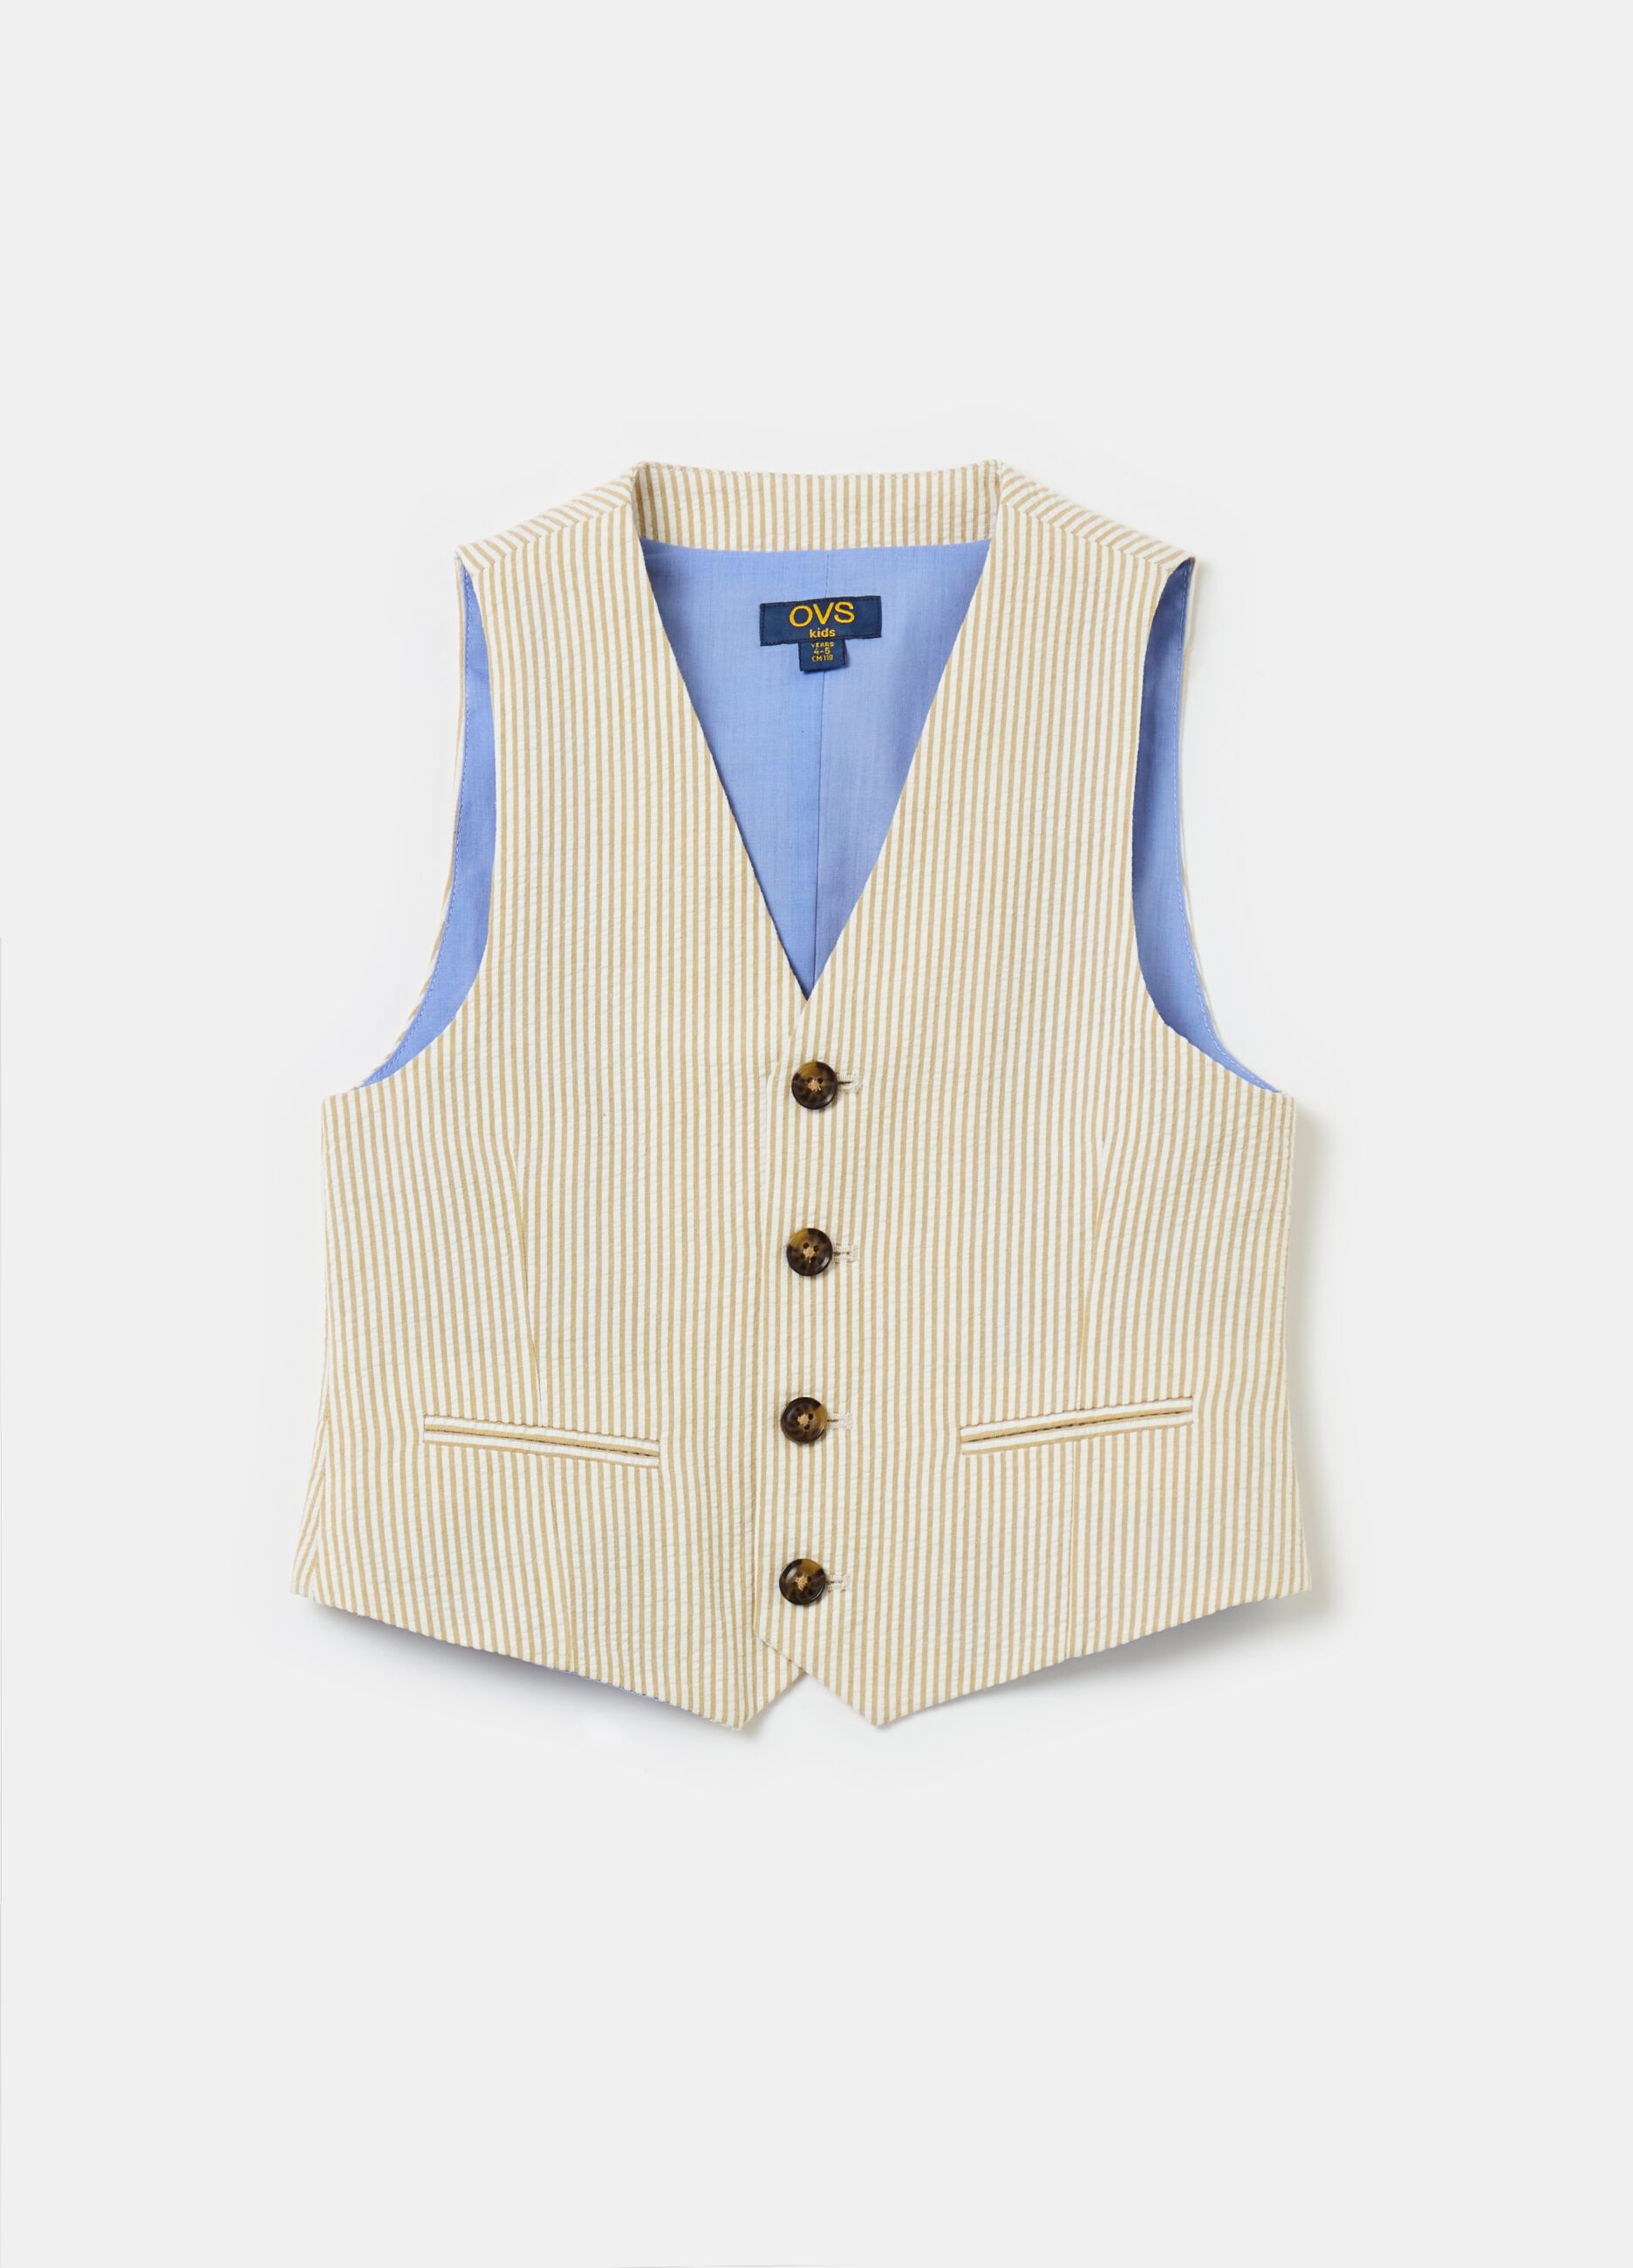 Cotton gilet with striped pattern